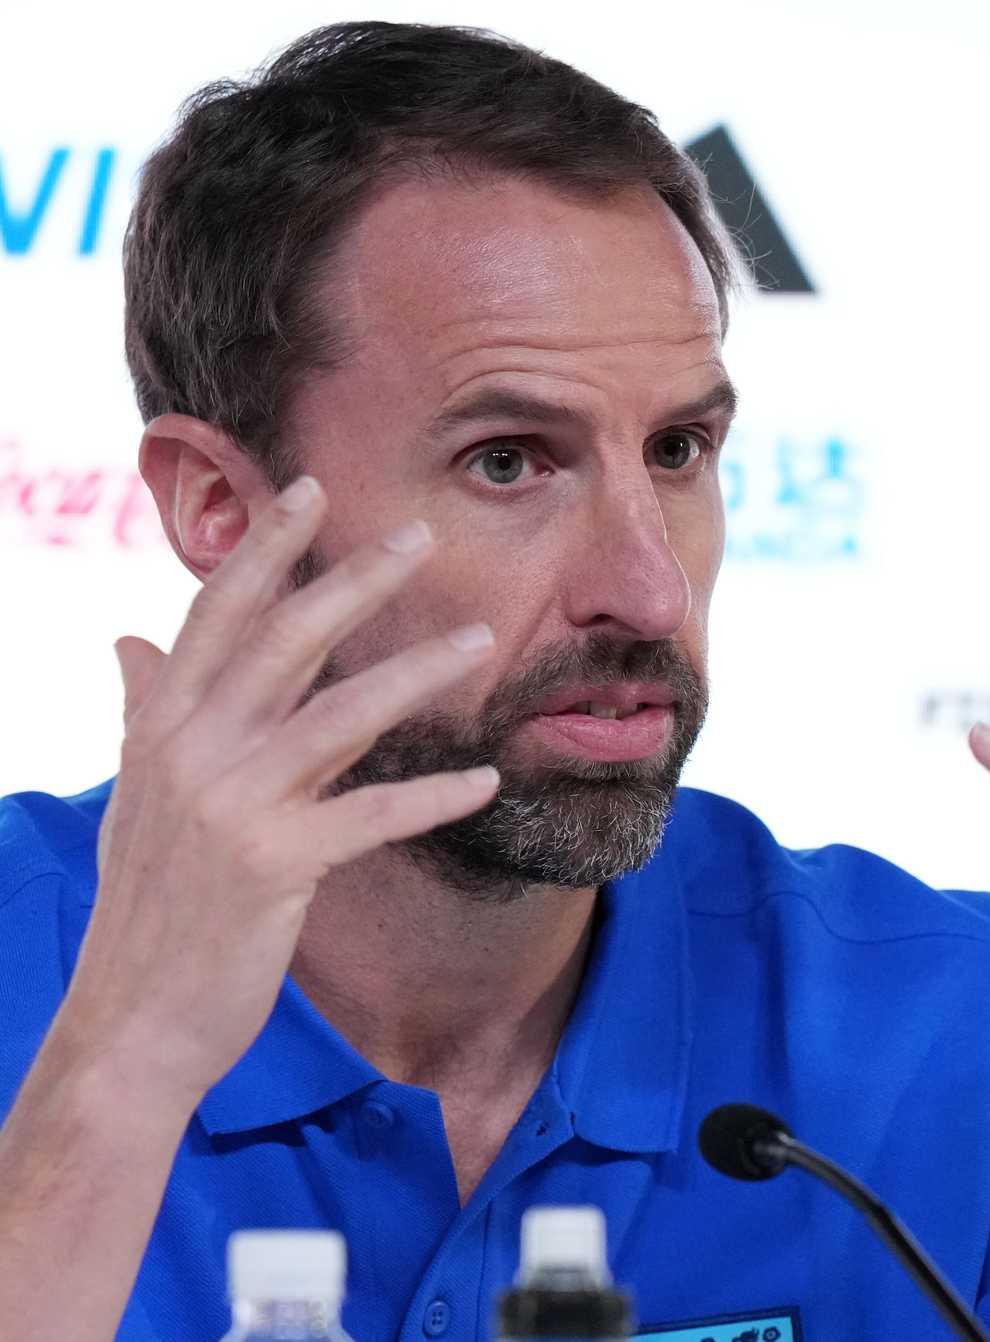 Gareth Southgate has not ruled out making further gestures regarding human rights in Qatar (Jonathan Brady/PA)